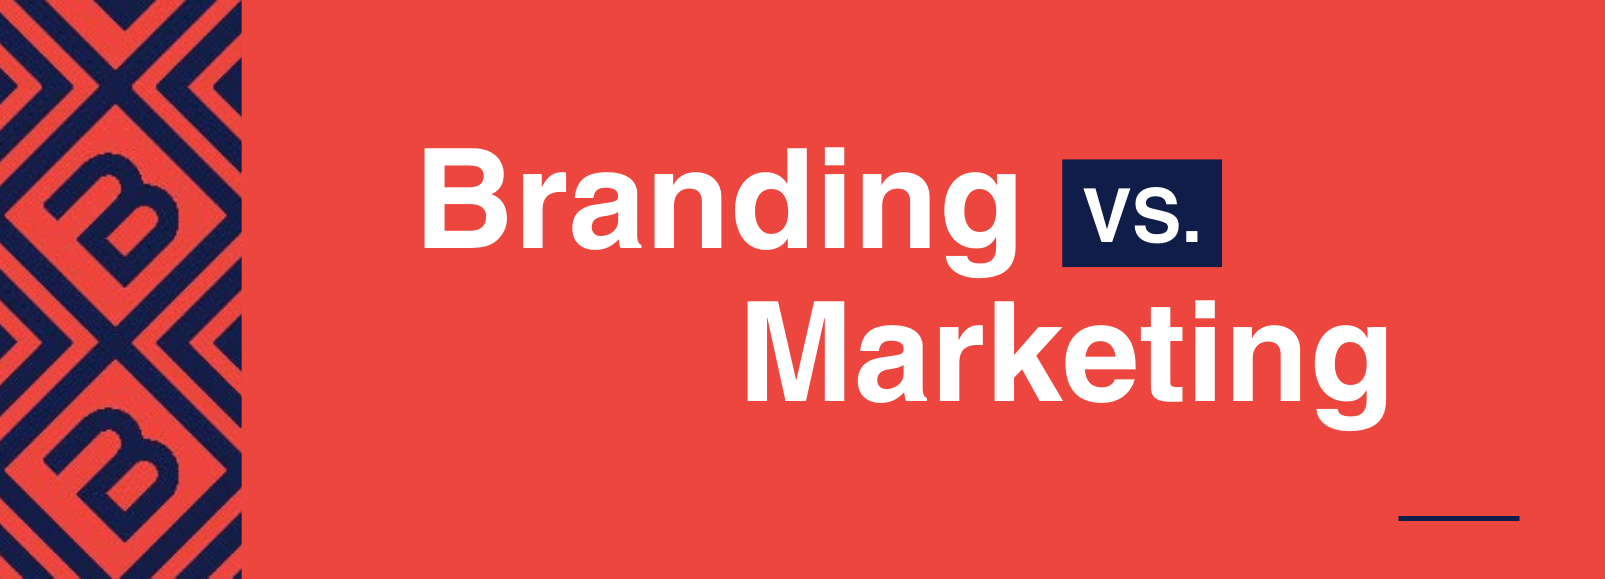 The Realm Of Marketing And Branding Is A Battleground Where Visibility And Relevance Are The Prizes.